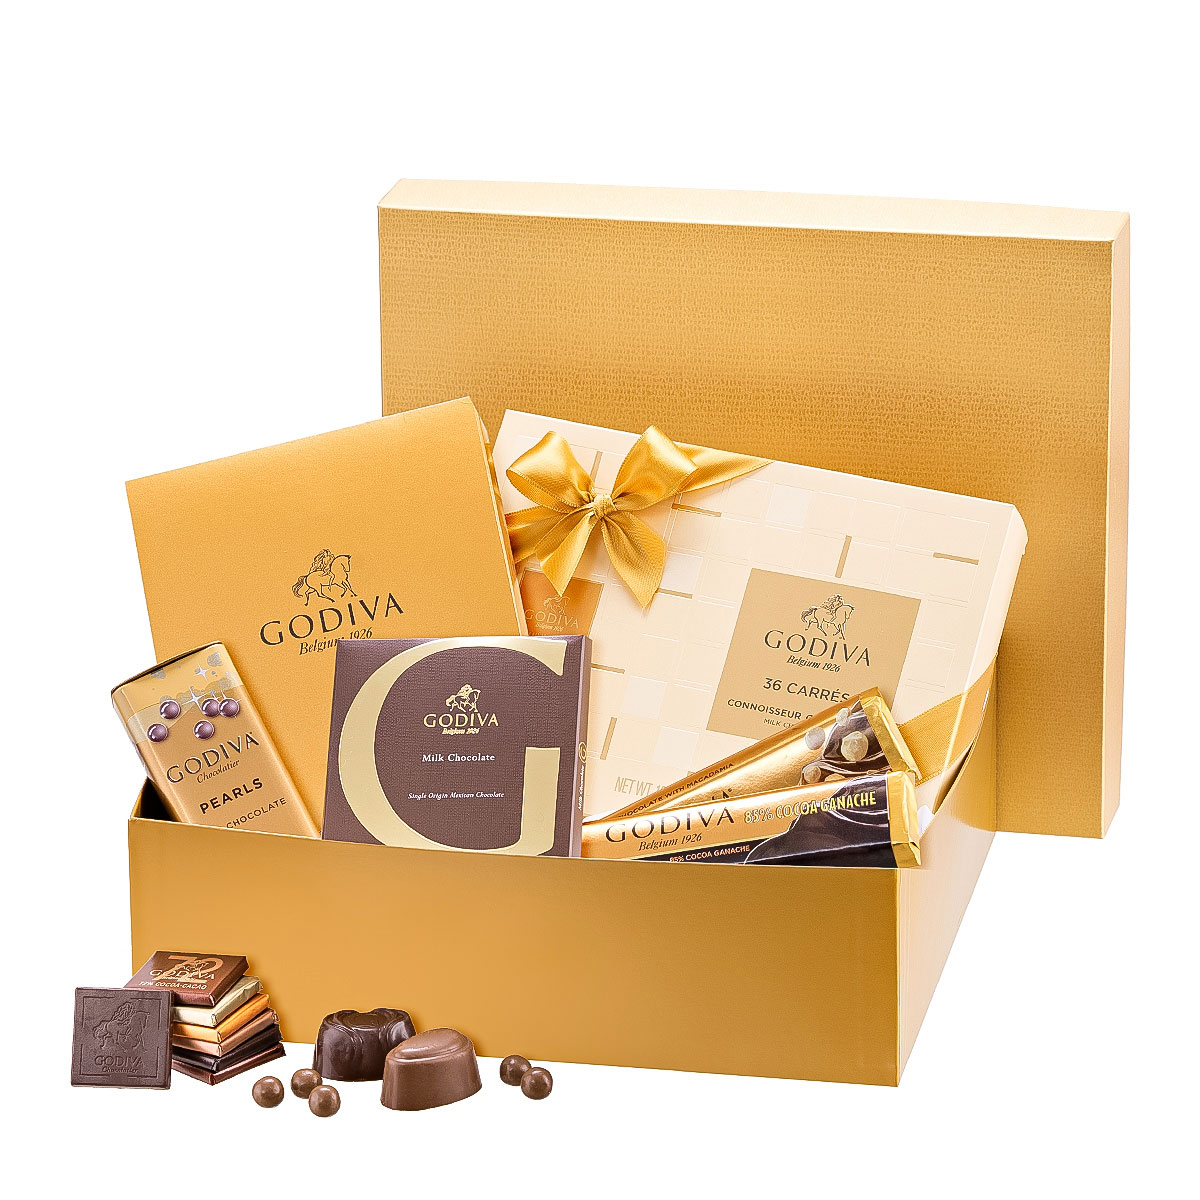 Godiva Chocolate Golden Classics Gift Box Delivery In Germany By Giftsforeurope